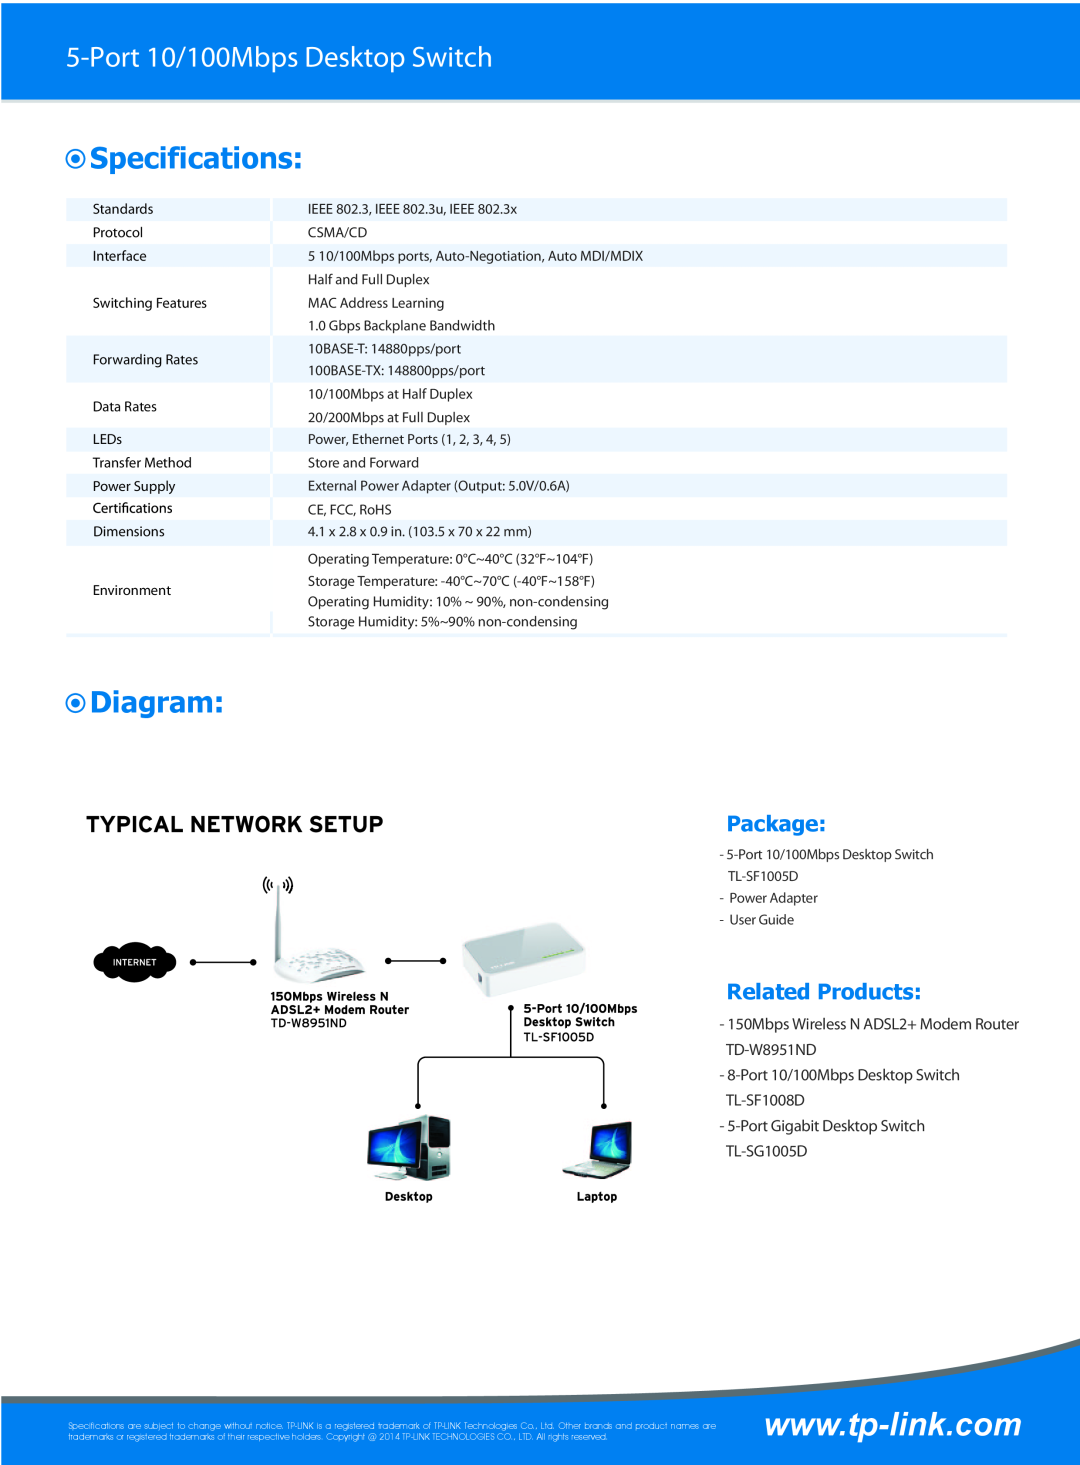 TP-Link TL-SF1005D specifications Specifications, Diagram, Port 10/100Mbps Desktop Switch, Package, Related Products 